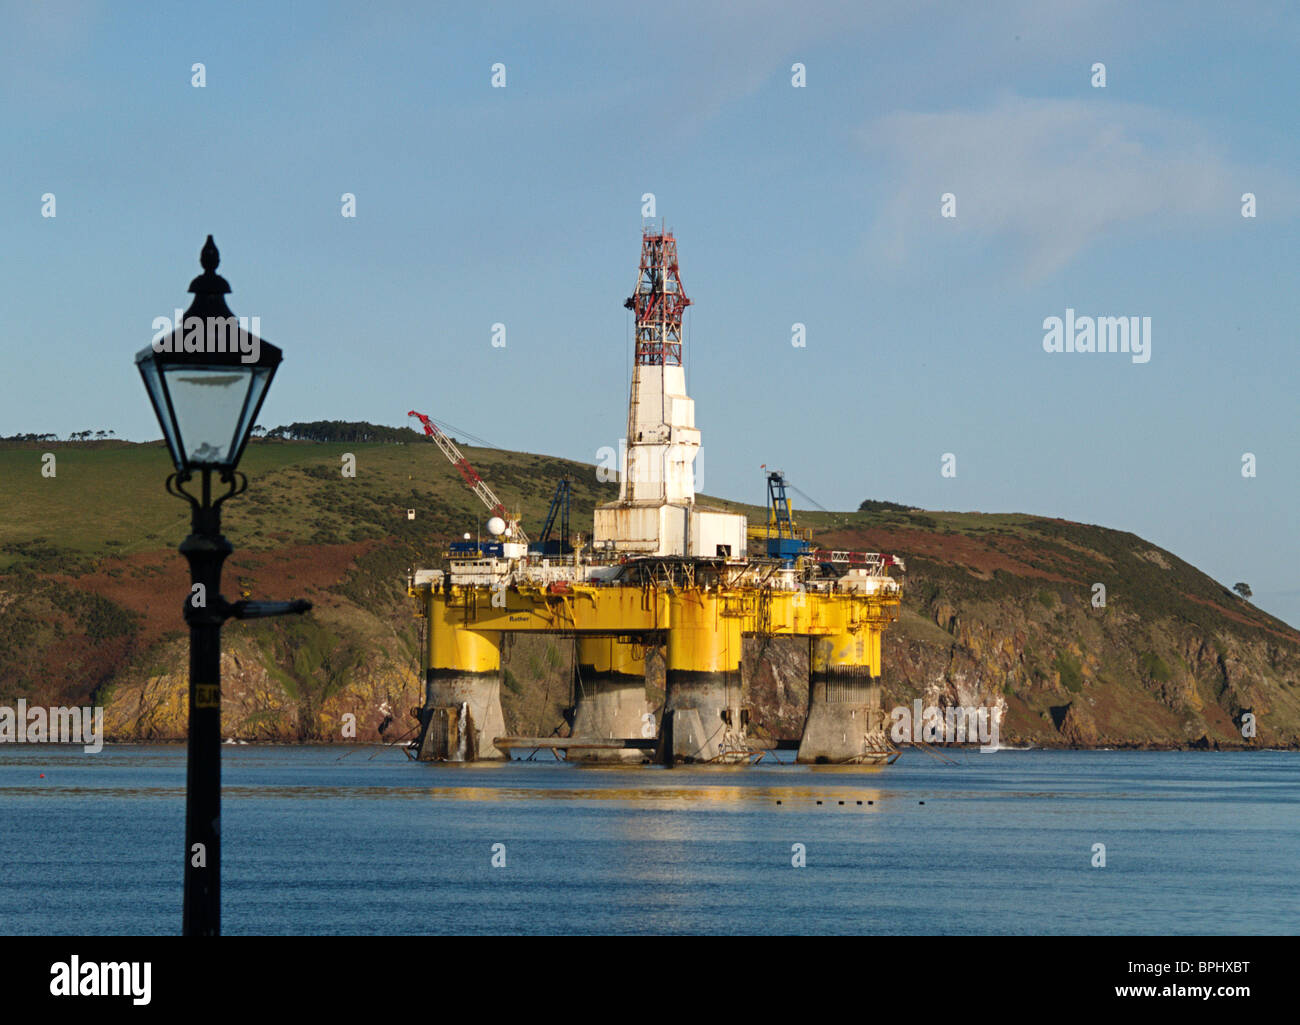 The semi-submersible Oil Drilling rig Transocean Rather moored in the Cromarty Firth, Scotland, framed by an street lamp Stock Photo